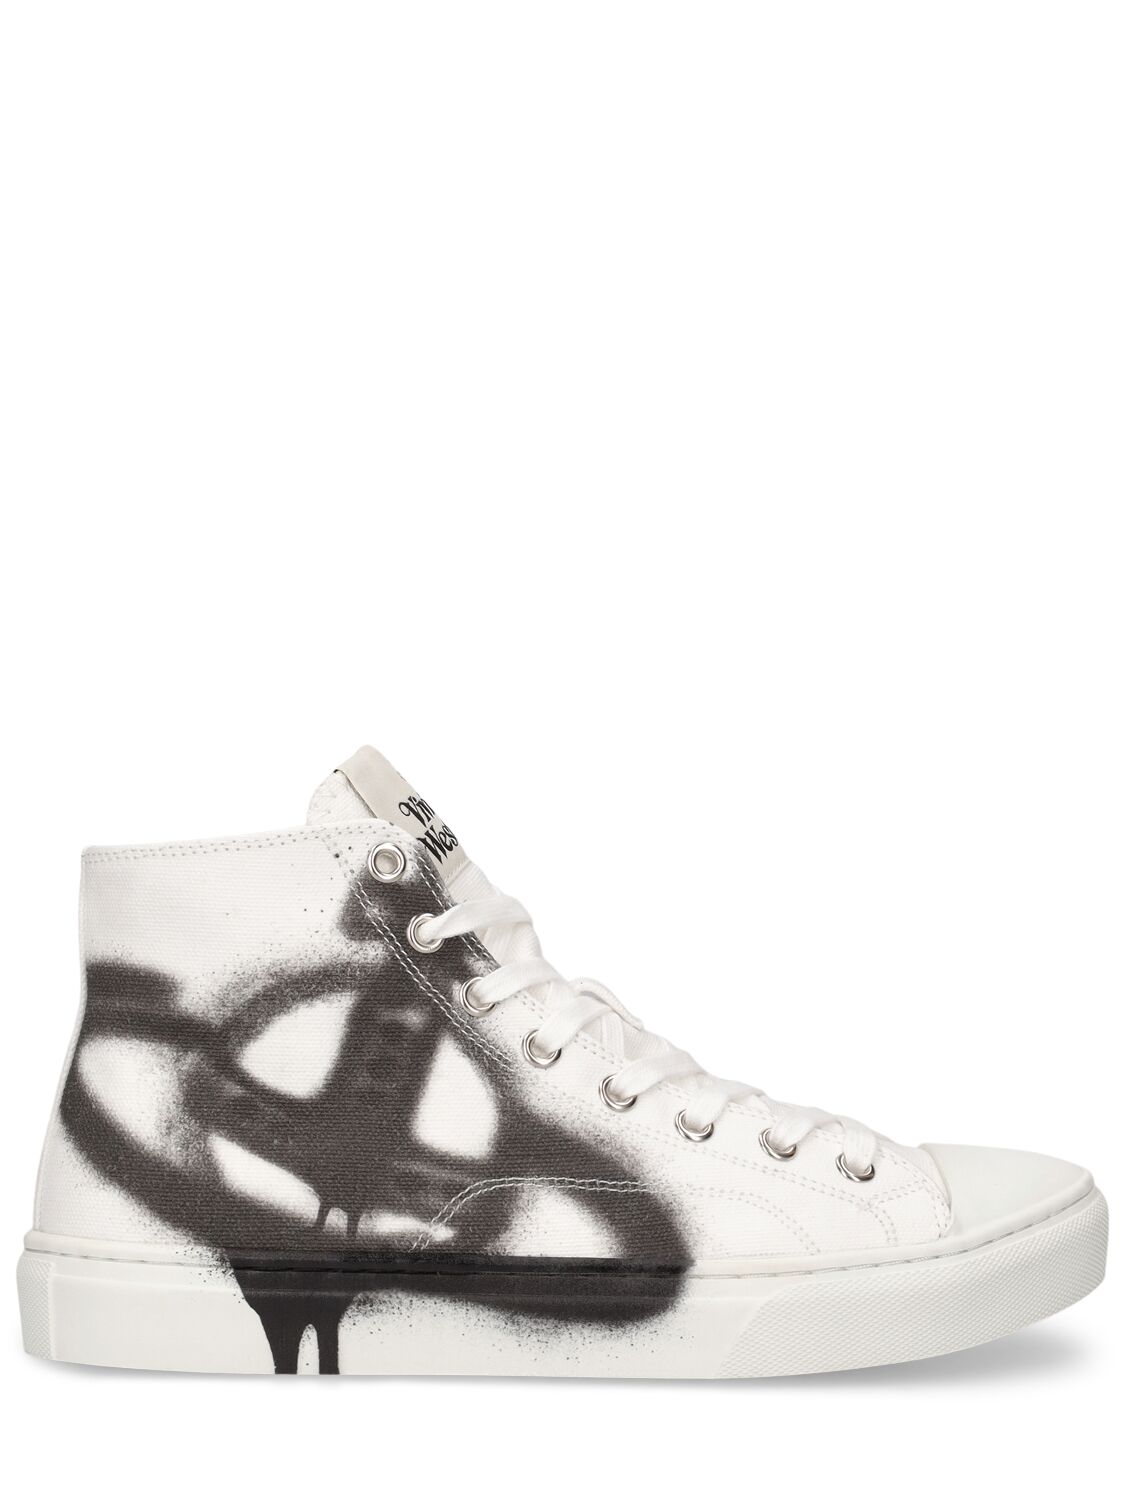 Image of Plimsoll High Top Canvas Sneakers